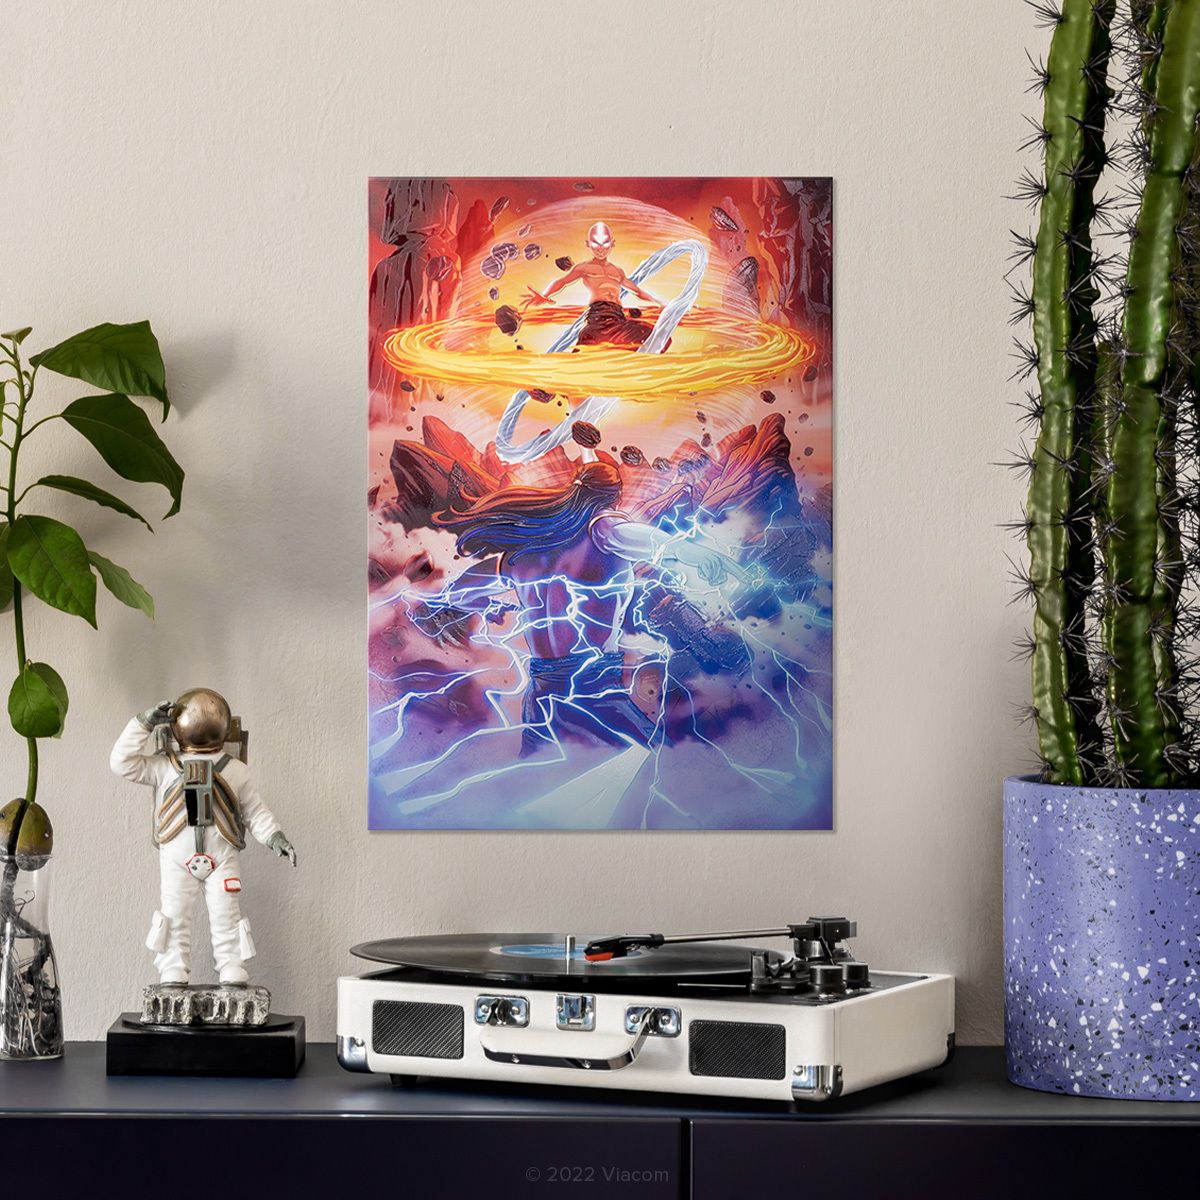 Displate Review: Are Metal Posters Worth It? - Tangible Day